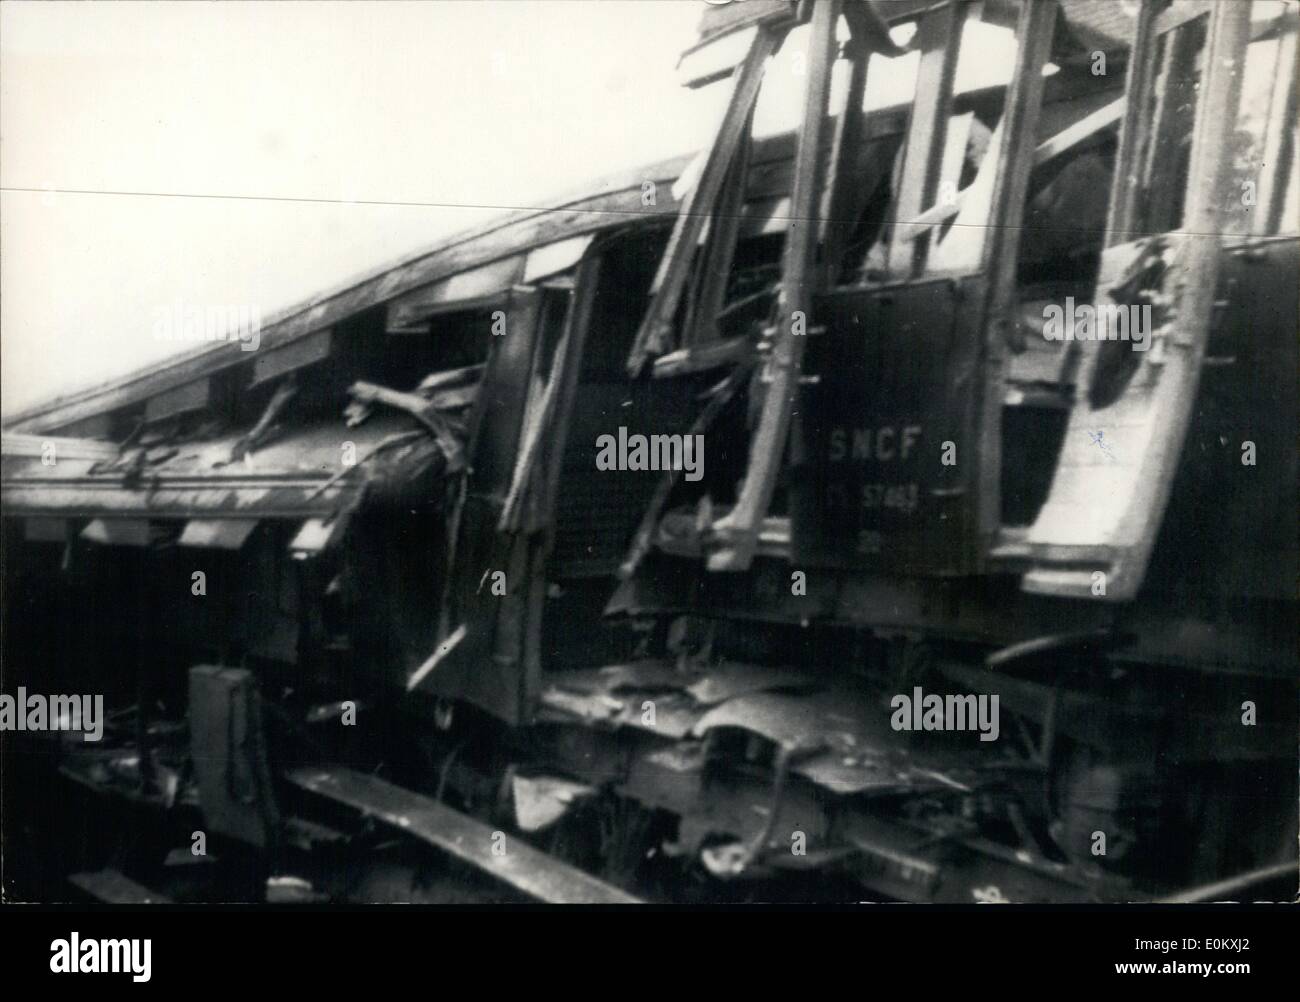 Oct. 10, 1952 - Train crash near Lyons - 8 dead and 50 injured: A serious train crash occurred this morning at several miles from Lyons. 8 dead and 50 injured are to be deplored. This accident is due to a loose engine and workmans train. The remains of the wagons of the workmans train. Stock Photo